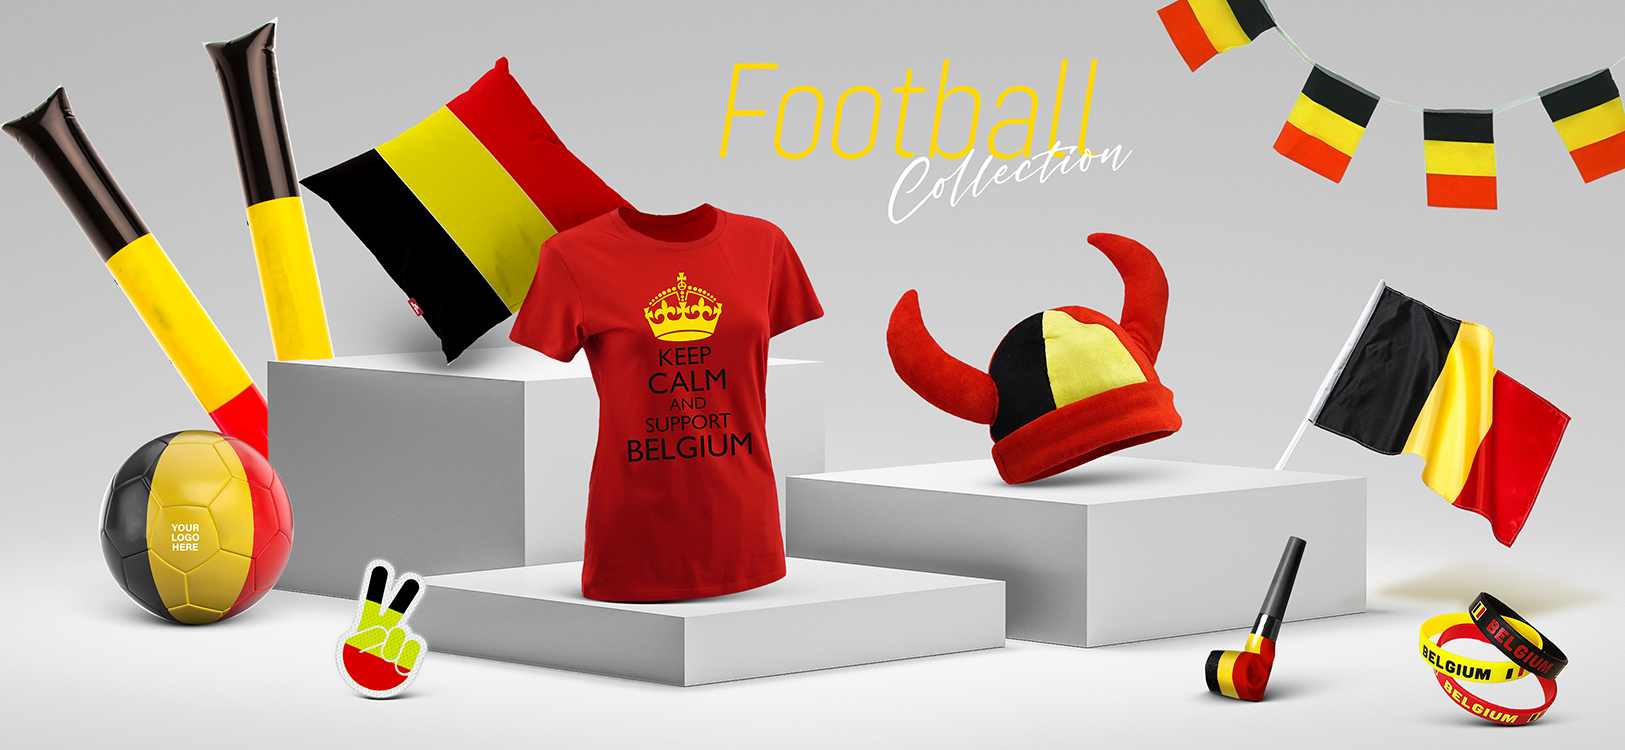 Football-Collection-650x300pixels-v3 (1)